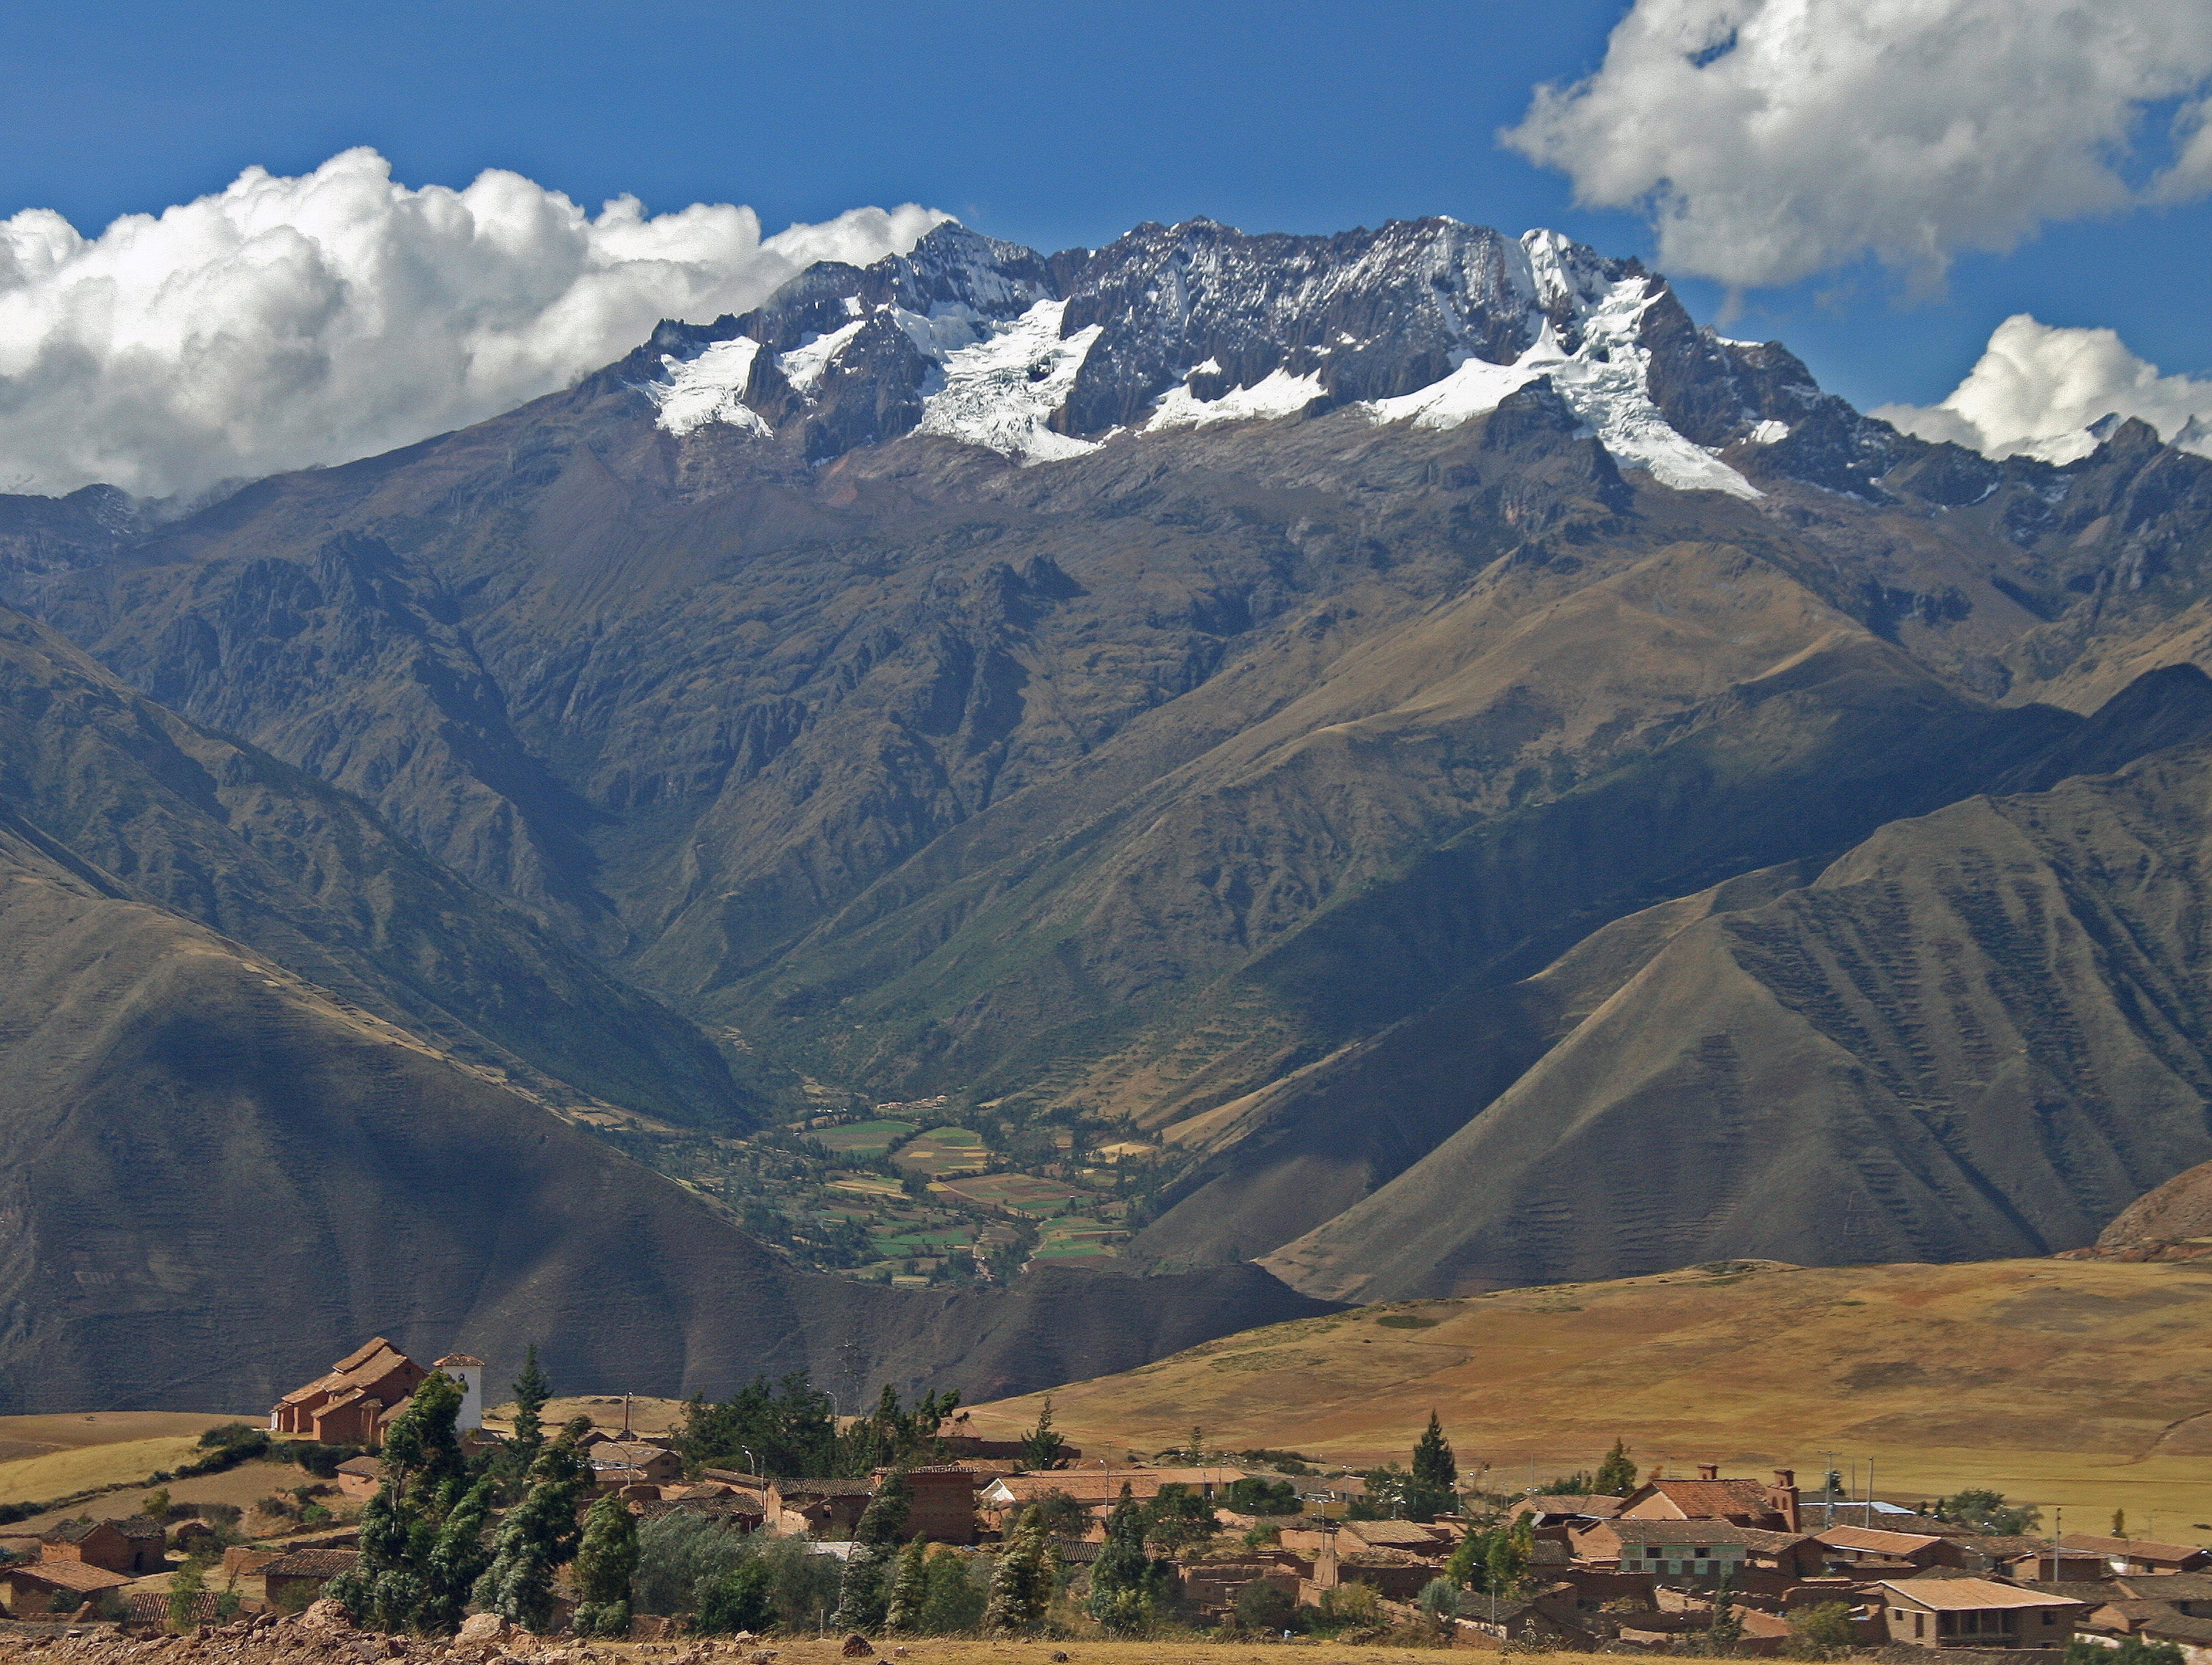 Situated in the heart of Peruvian Andes, twelve miles north of Cusco, the Urubamba Valley, known as the Sacred Valley of the Incas, is a long-recognized hotspot of biological diversity.  Photo © Gleb Raygorodetsky